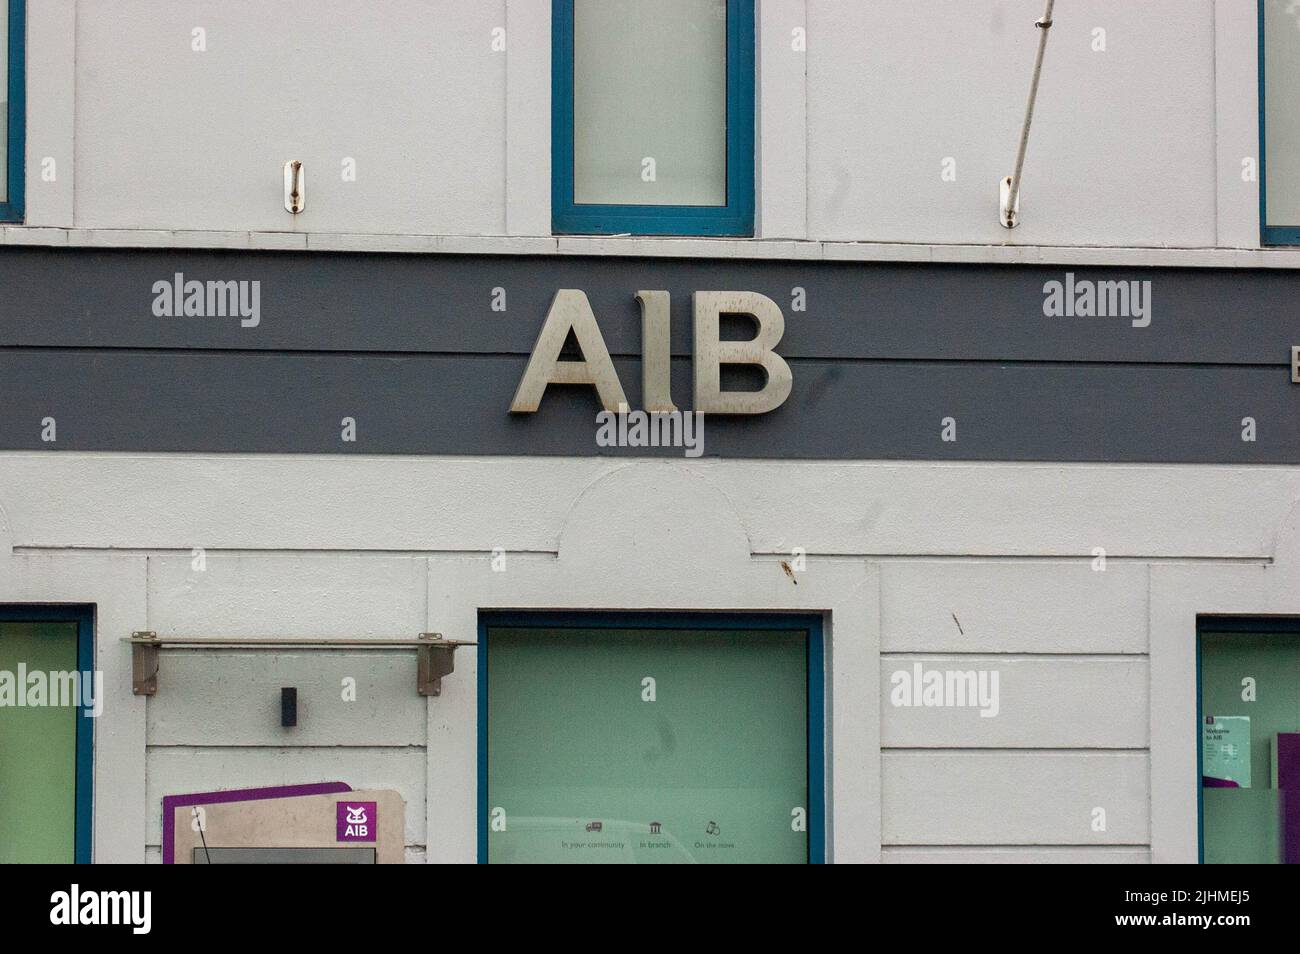 Bantry West Cork Ireland,  Tuesday 19 Jul 2022; AIB has announced  that it is to make 70 branches nation wide., cashless. These include Castletownbere, Kinsale, Dunmanway and 9 other branches in Cork. The bank, which is to expand it's business with An Post,  has said, however, that no branches are going to close. West Cork TD, Michael Collins(IND) has said this is a retrograde step by AIB HQ to Our rural towns and branches and to their staff and customers. Credit; ED/Alamy Live News Stock Photo